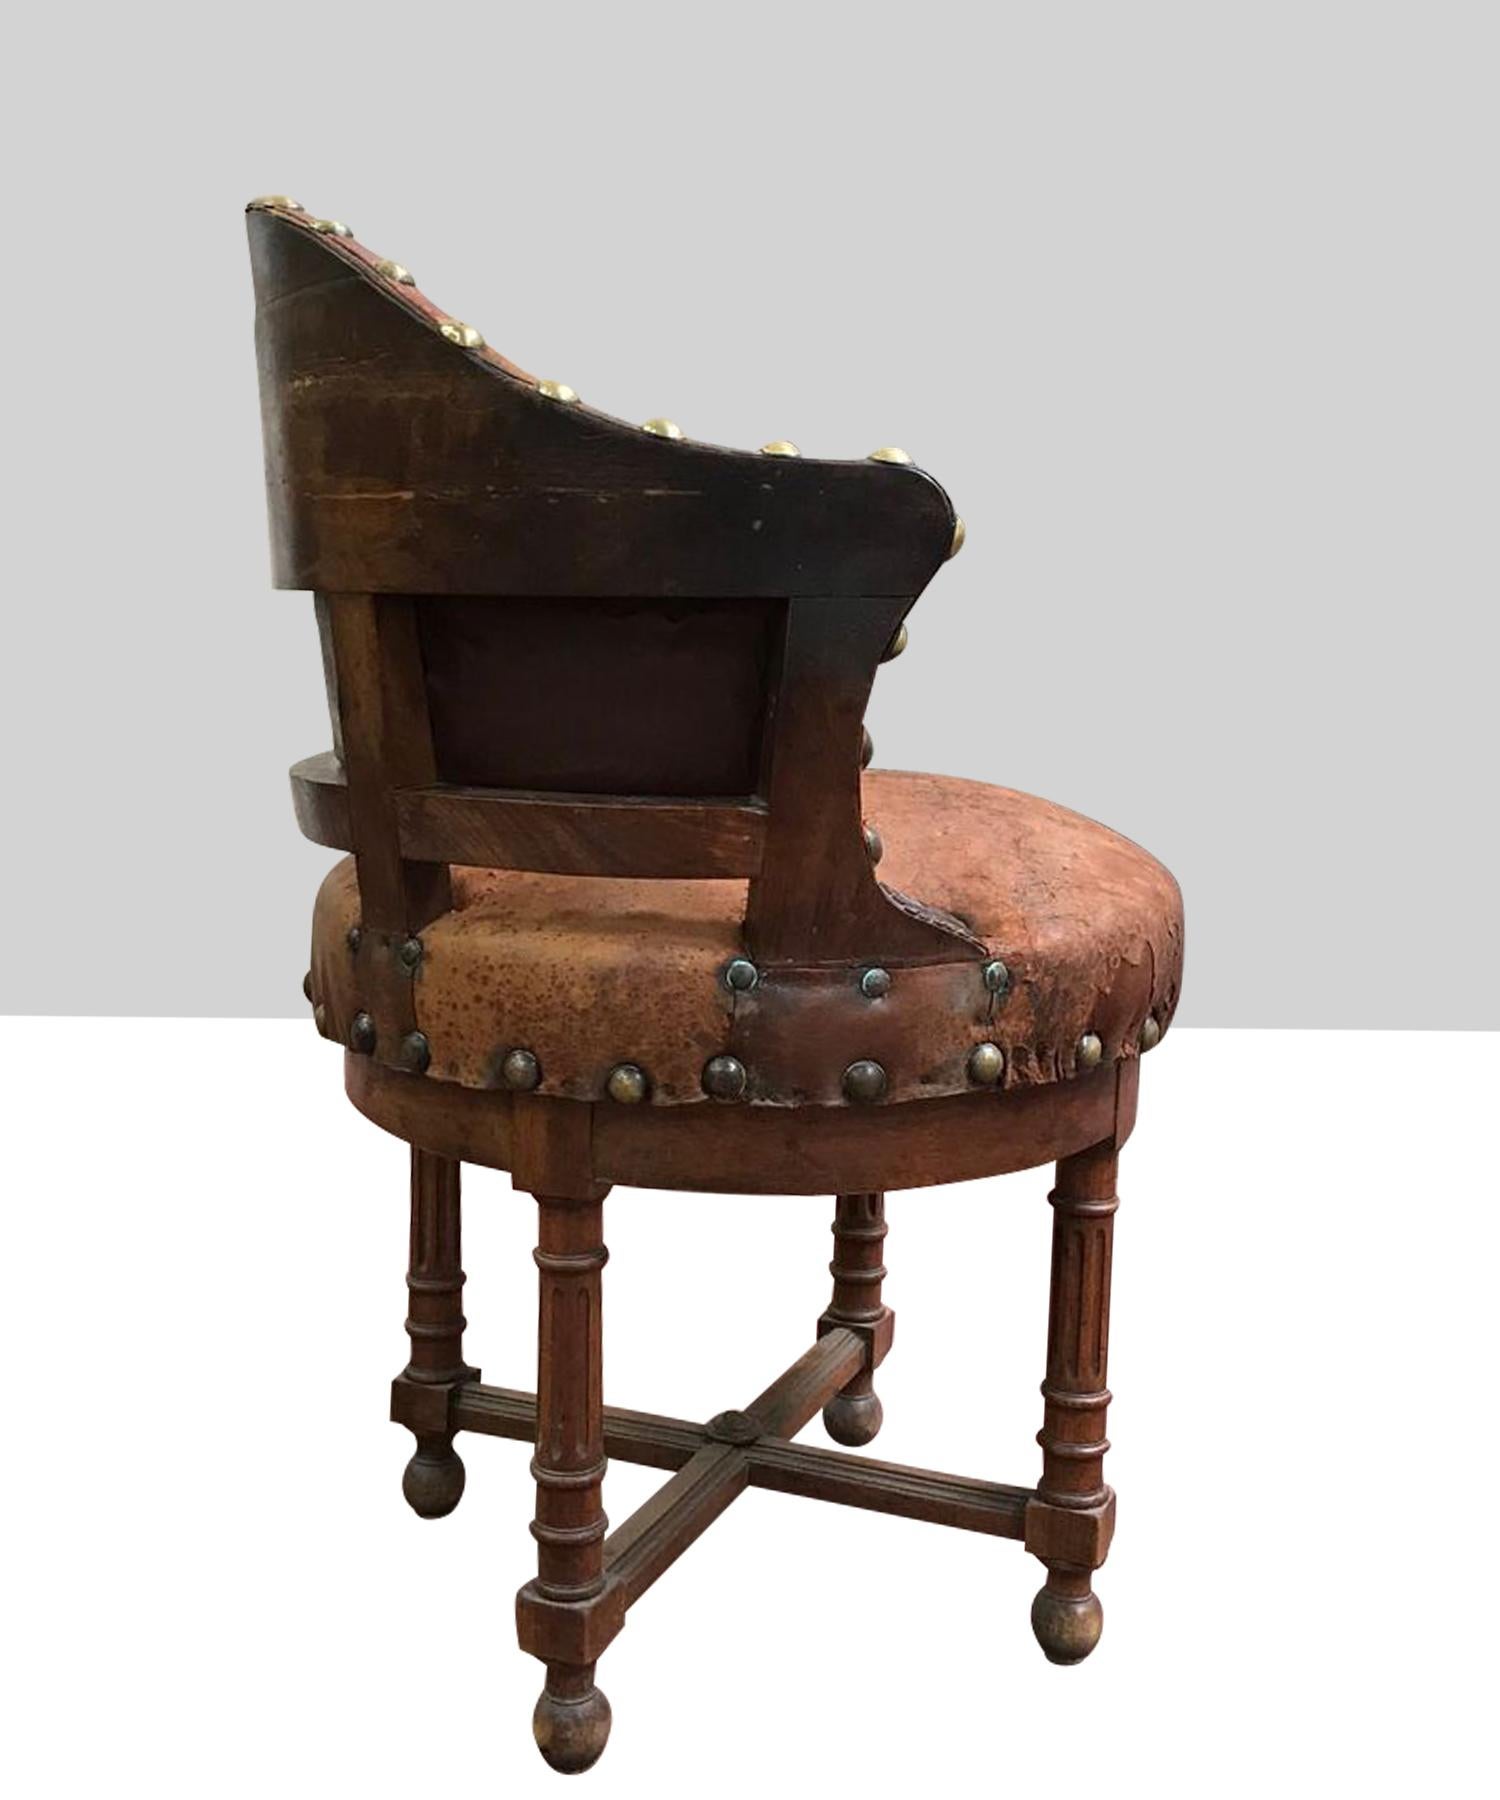 French Leather Armchair